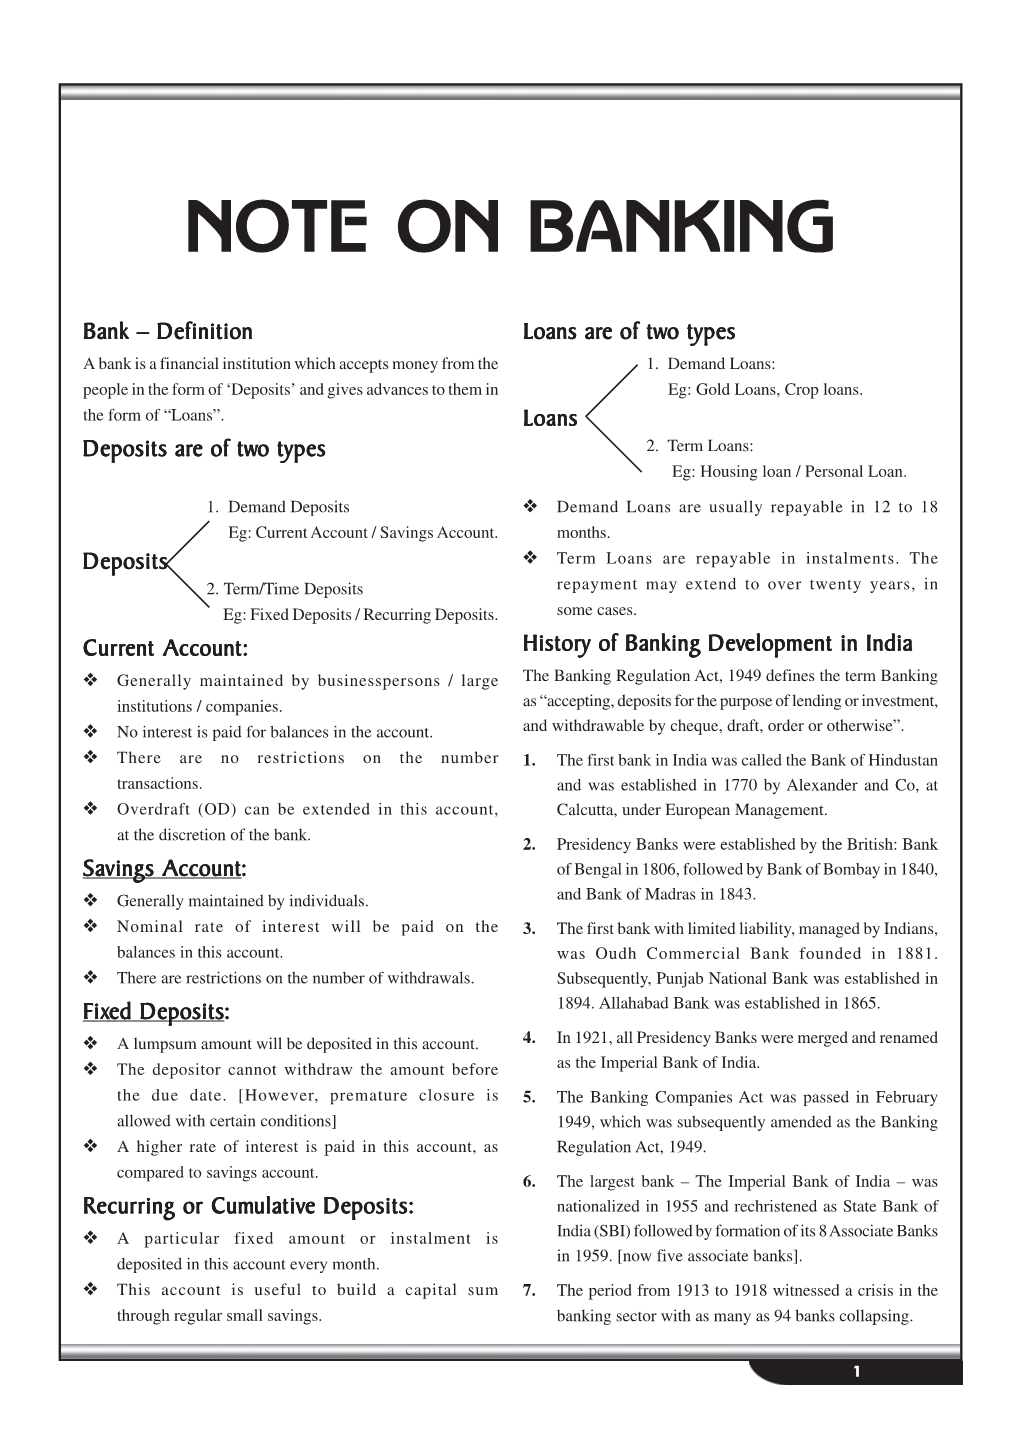 Note on Banking